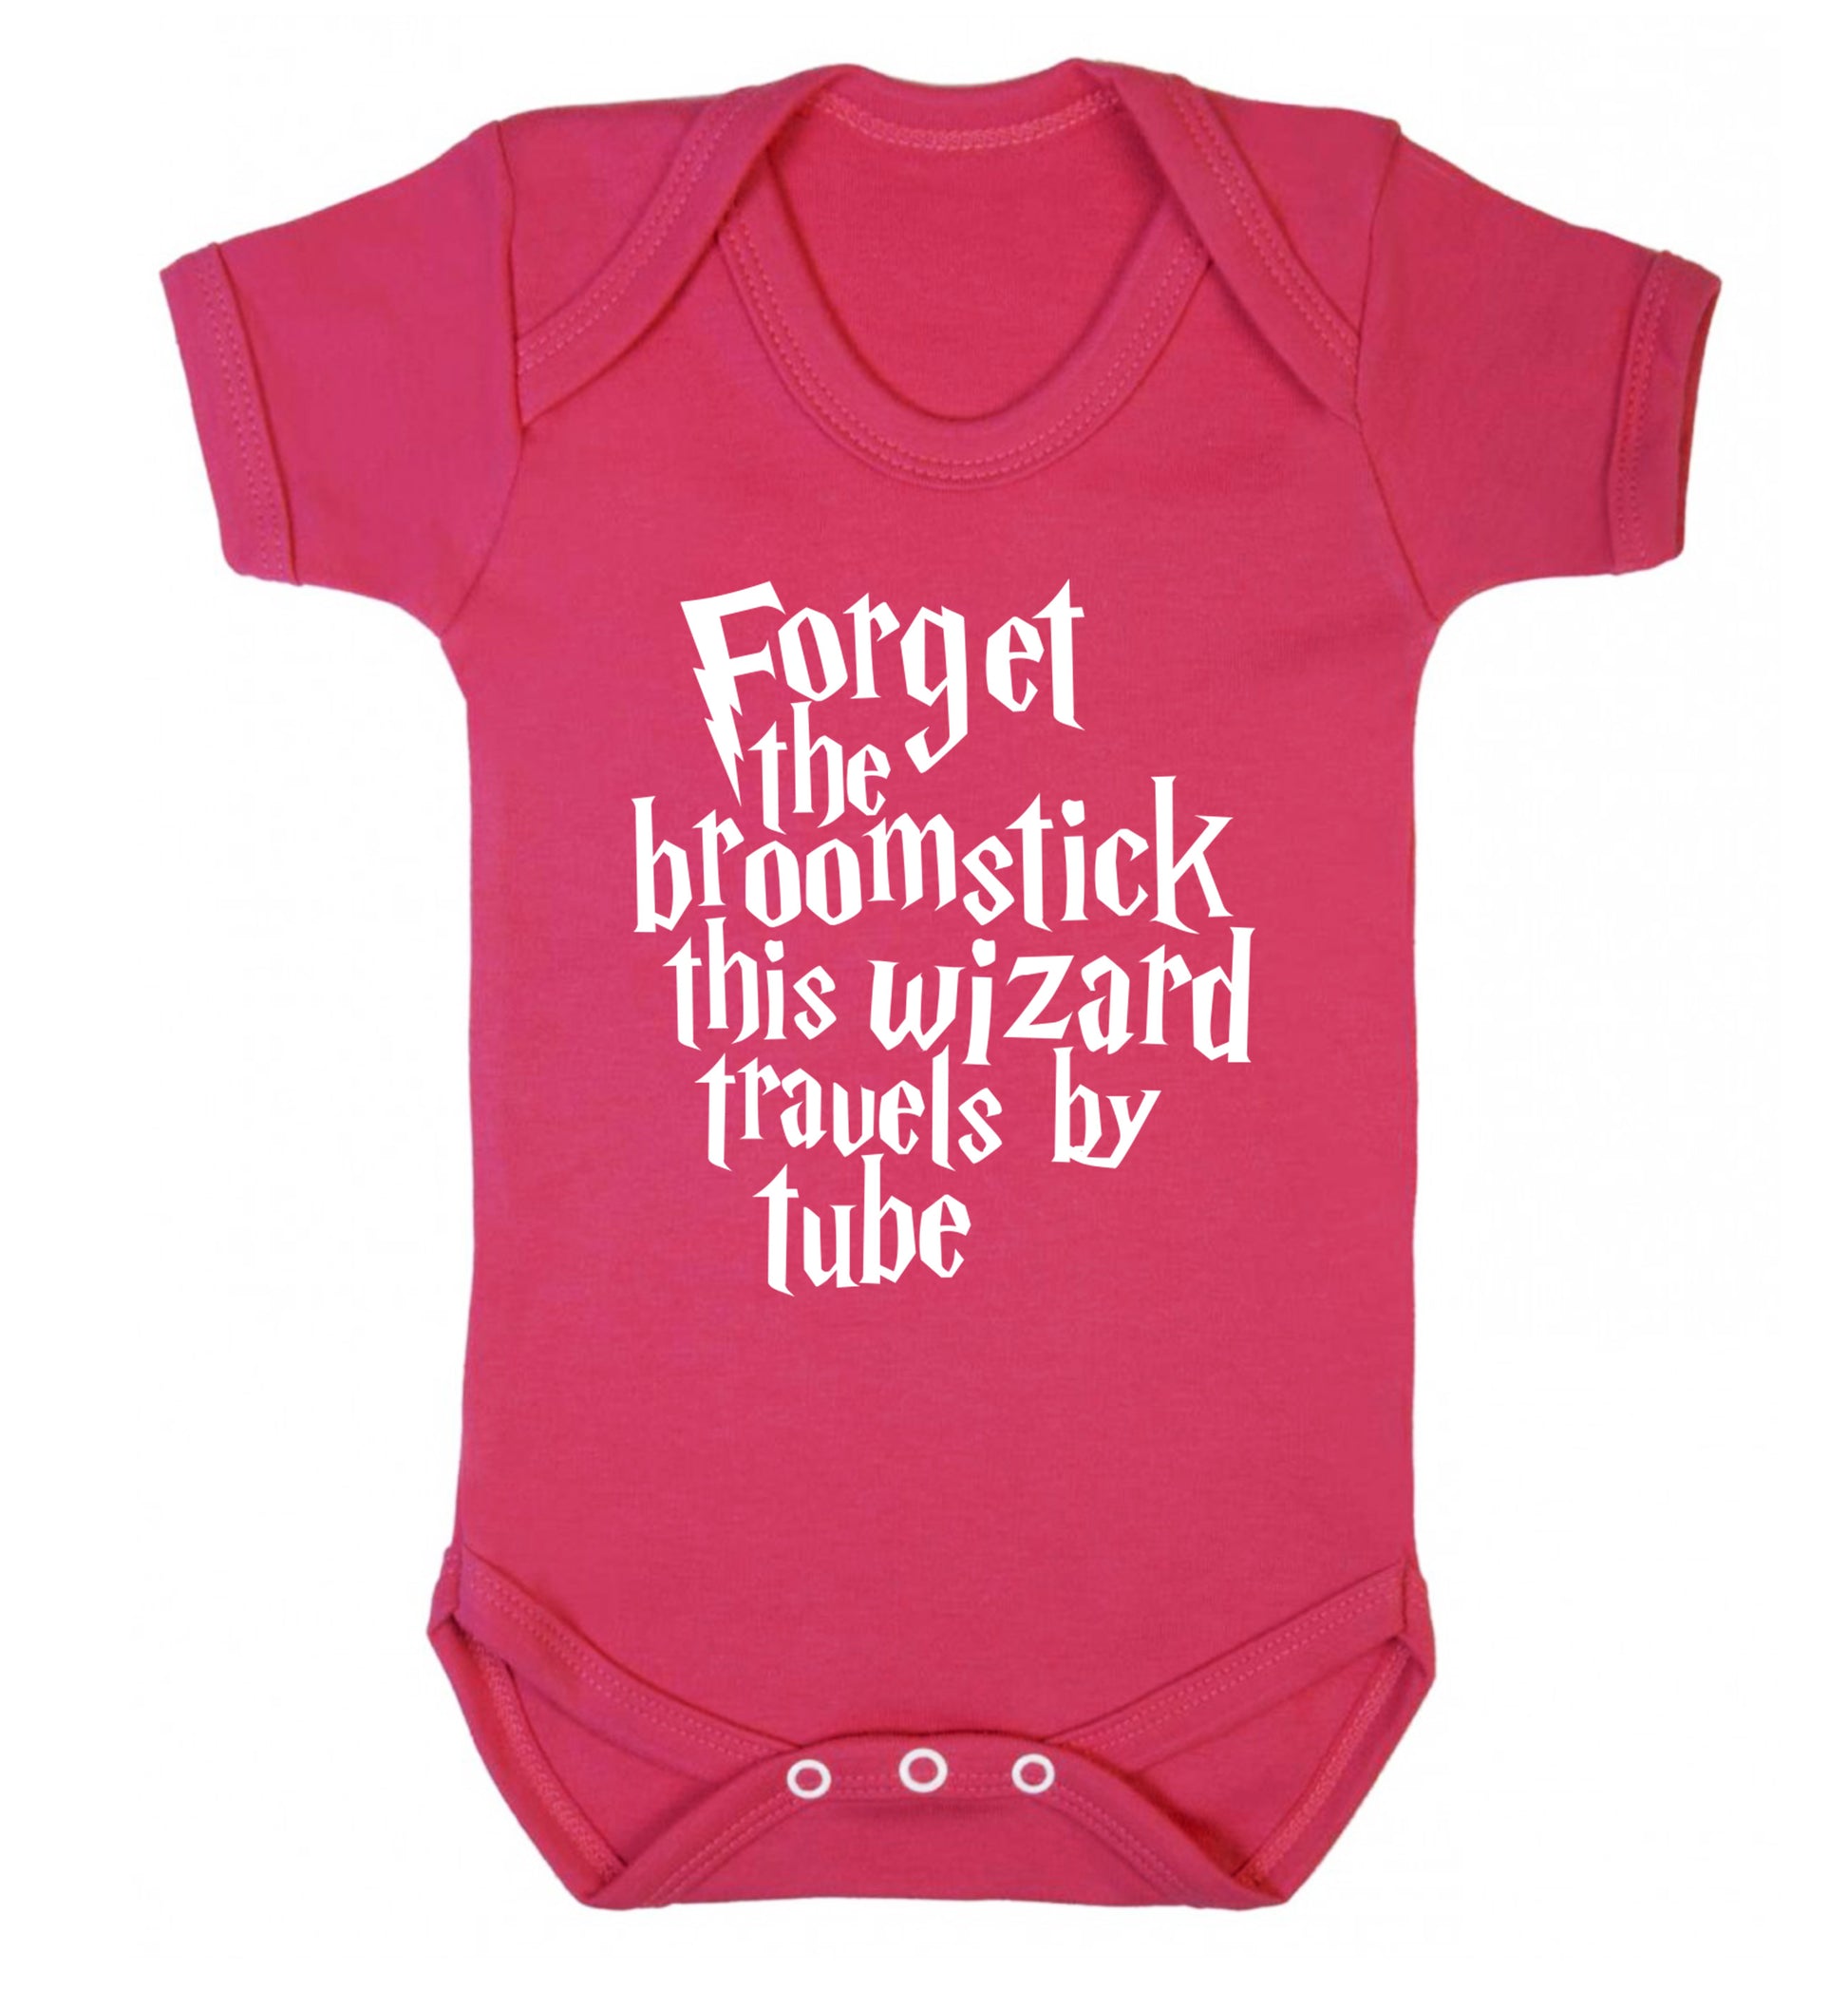 Forget the broomstick this wizard travels by tube Baby Vest dark pink 18-24 months